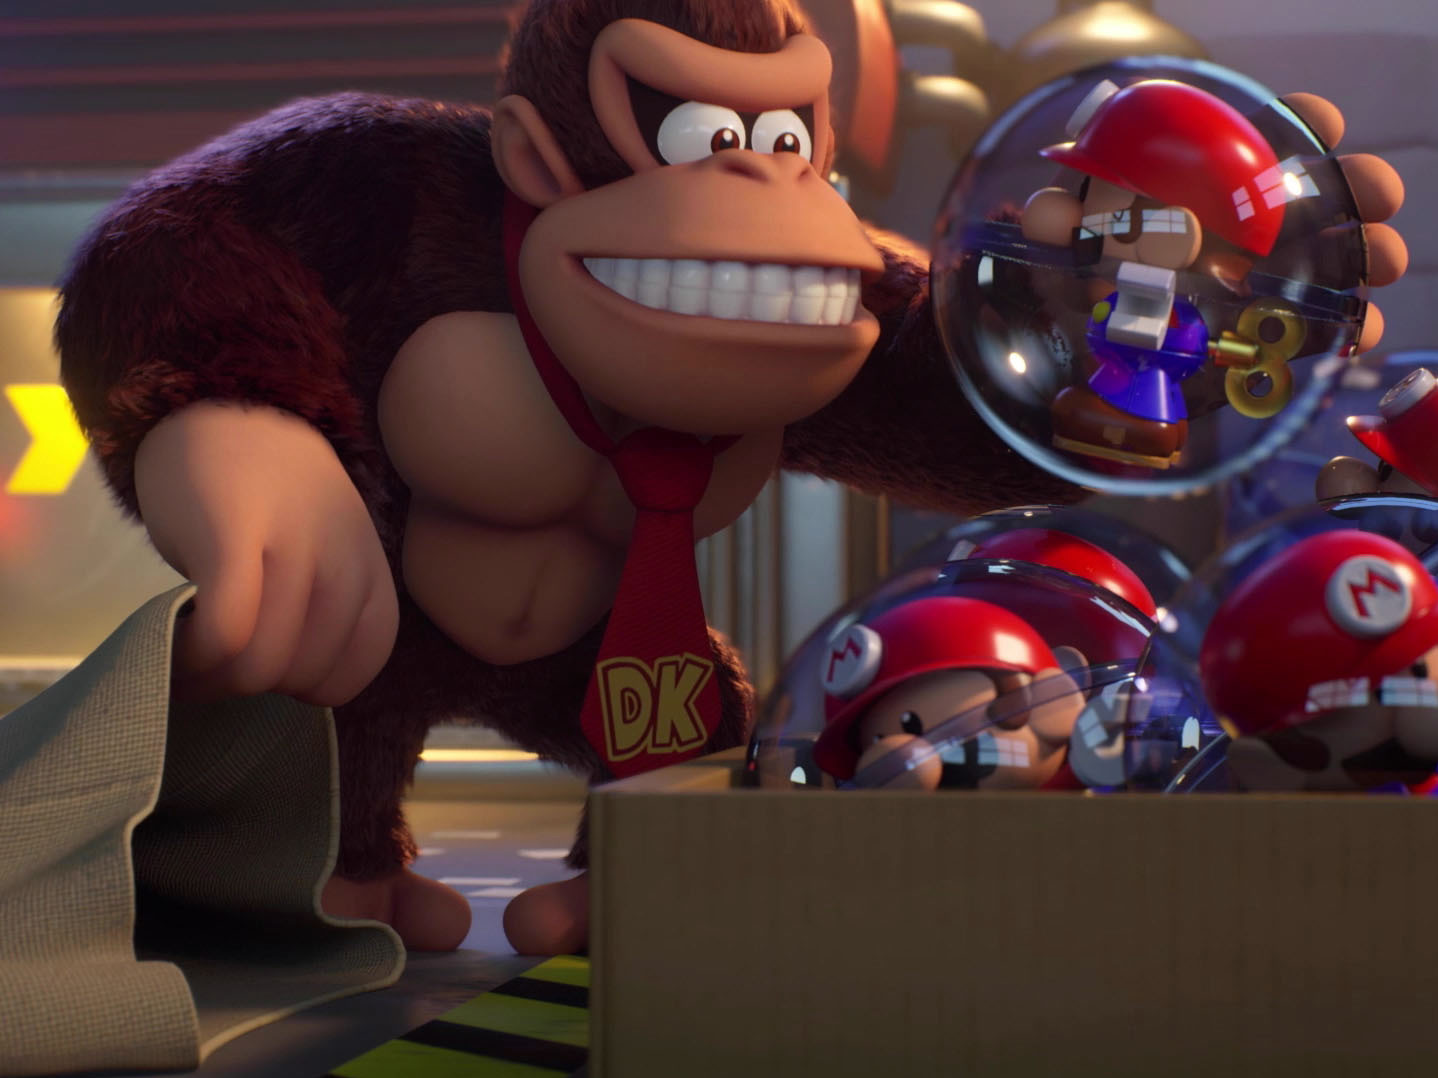 Nintendo amps up an old feud in 'Mario vs. Donkey Kong' - WPR